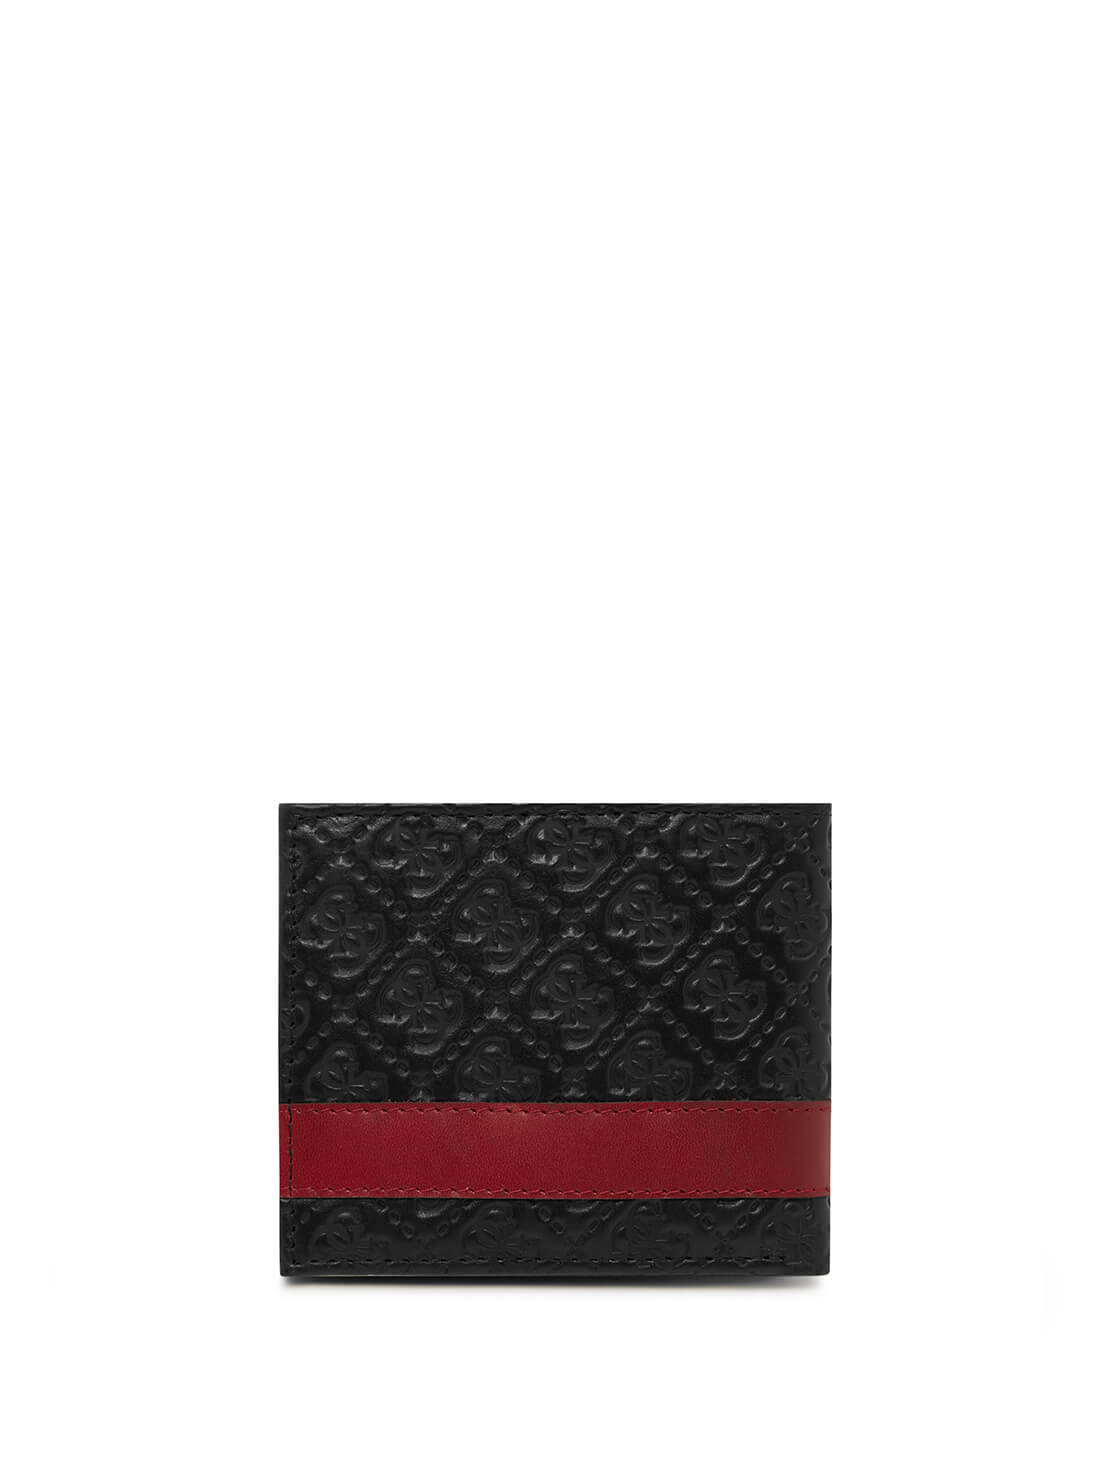 GUESS Men's Red Black Quattro G Slimfold Wallet 31GUE13215 Back View